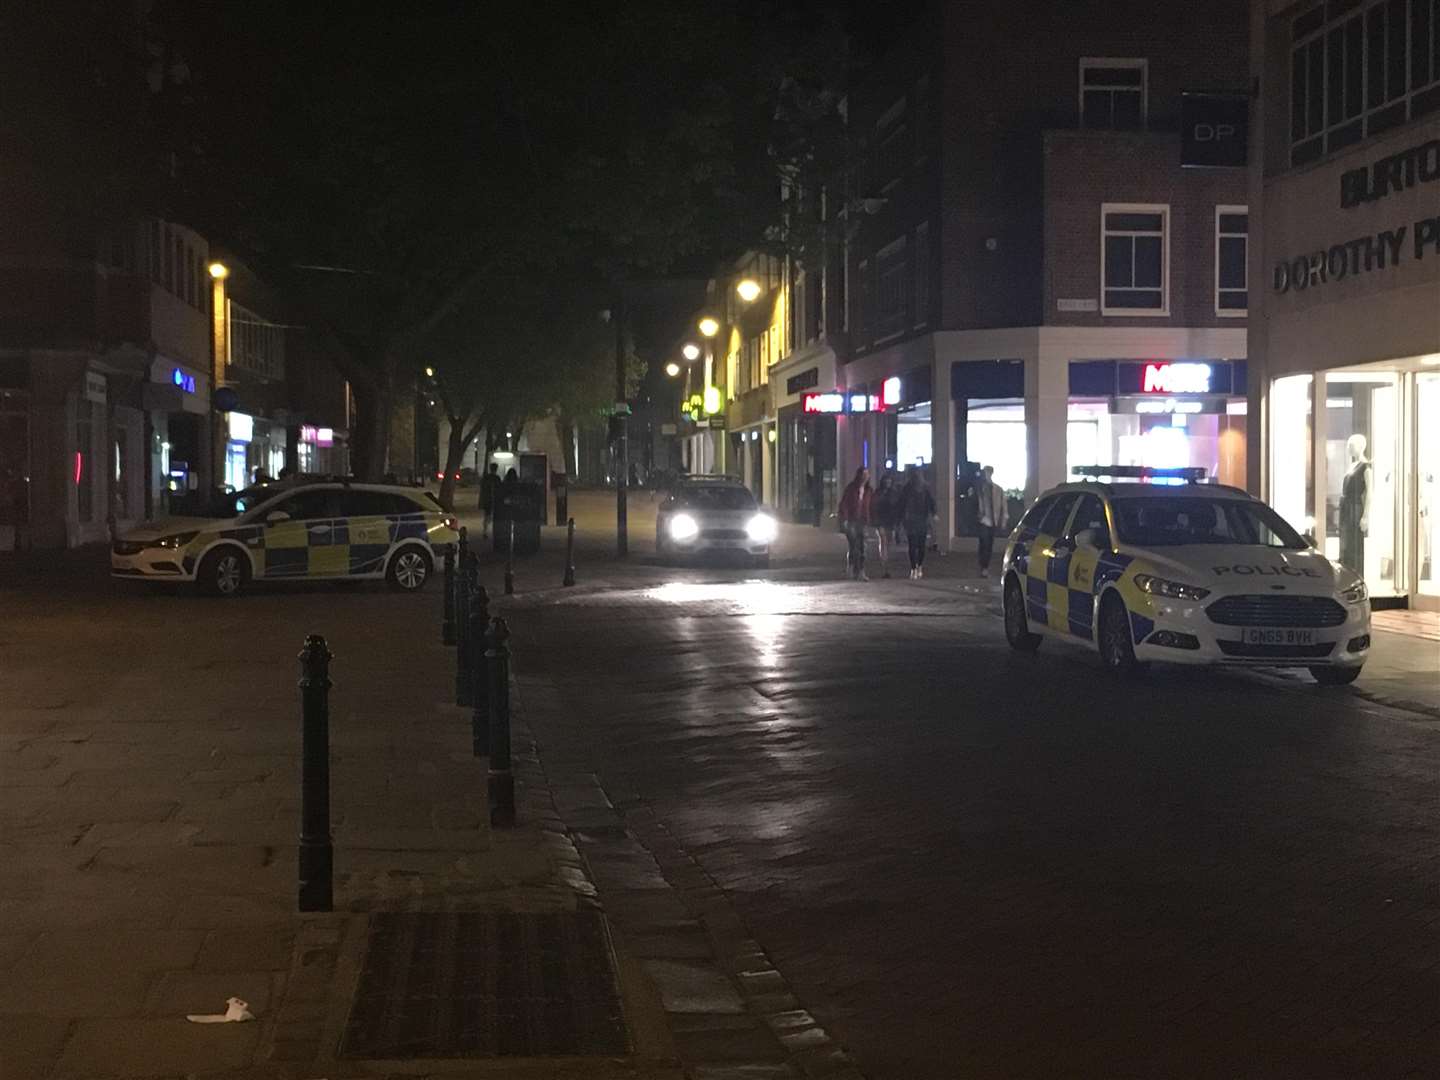 Police responding to the incident at the time